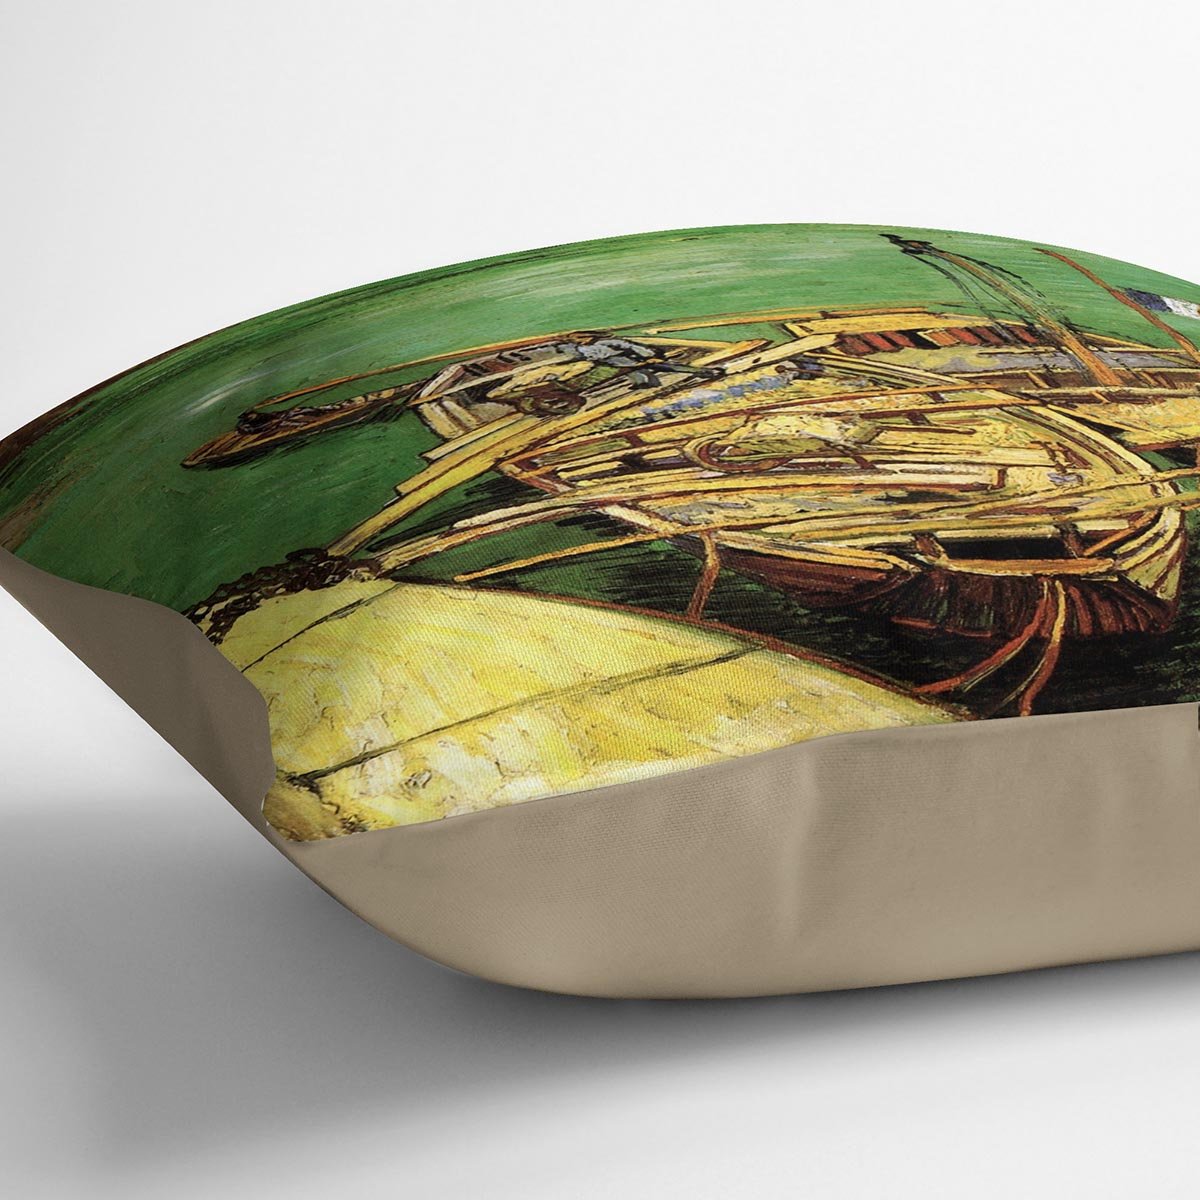 Quay with Men Unloading Sand Barges by Van Gogh Throw Pillow